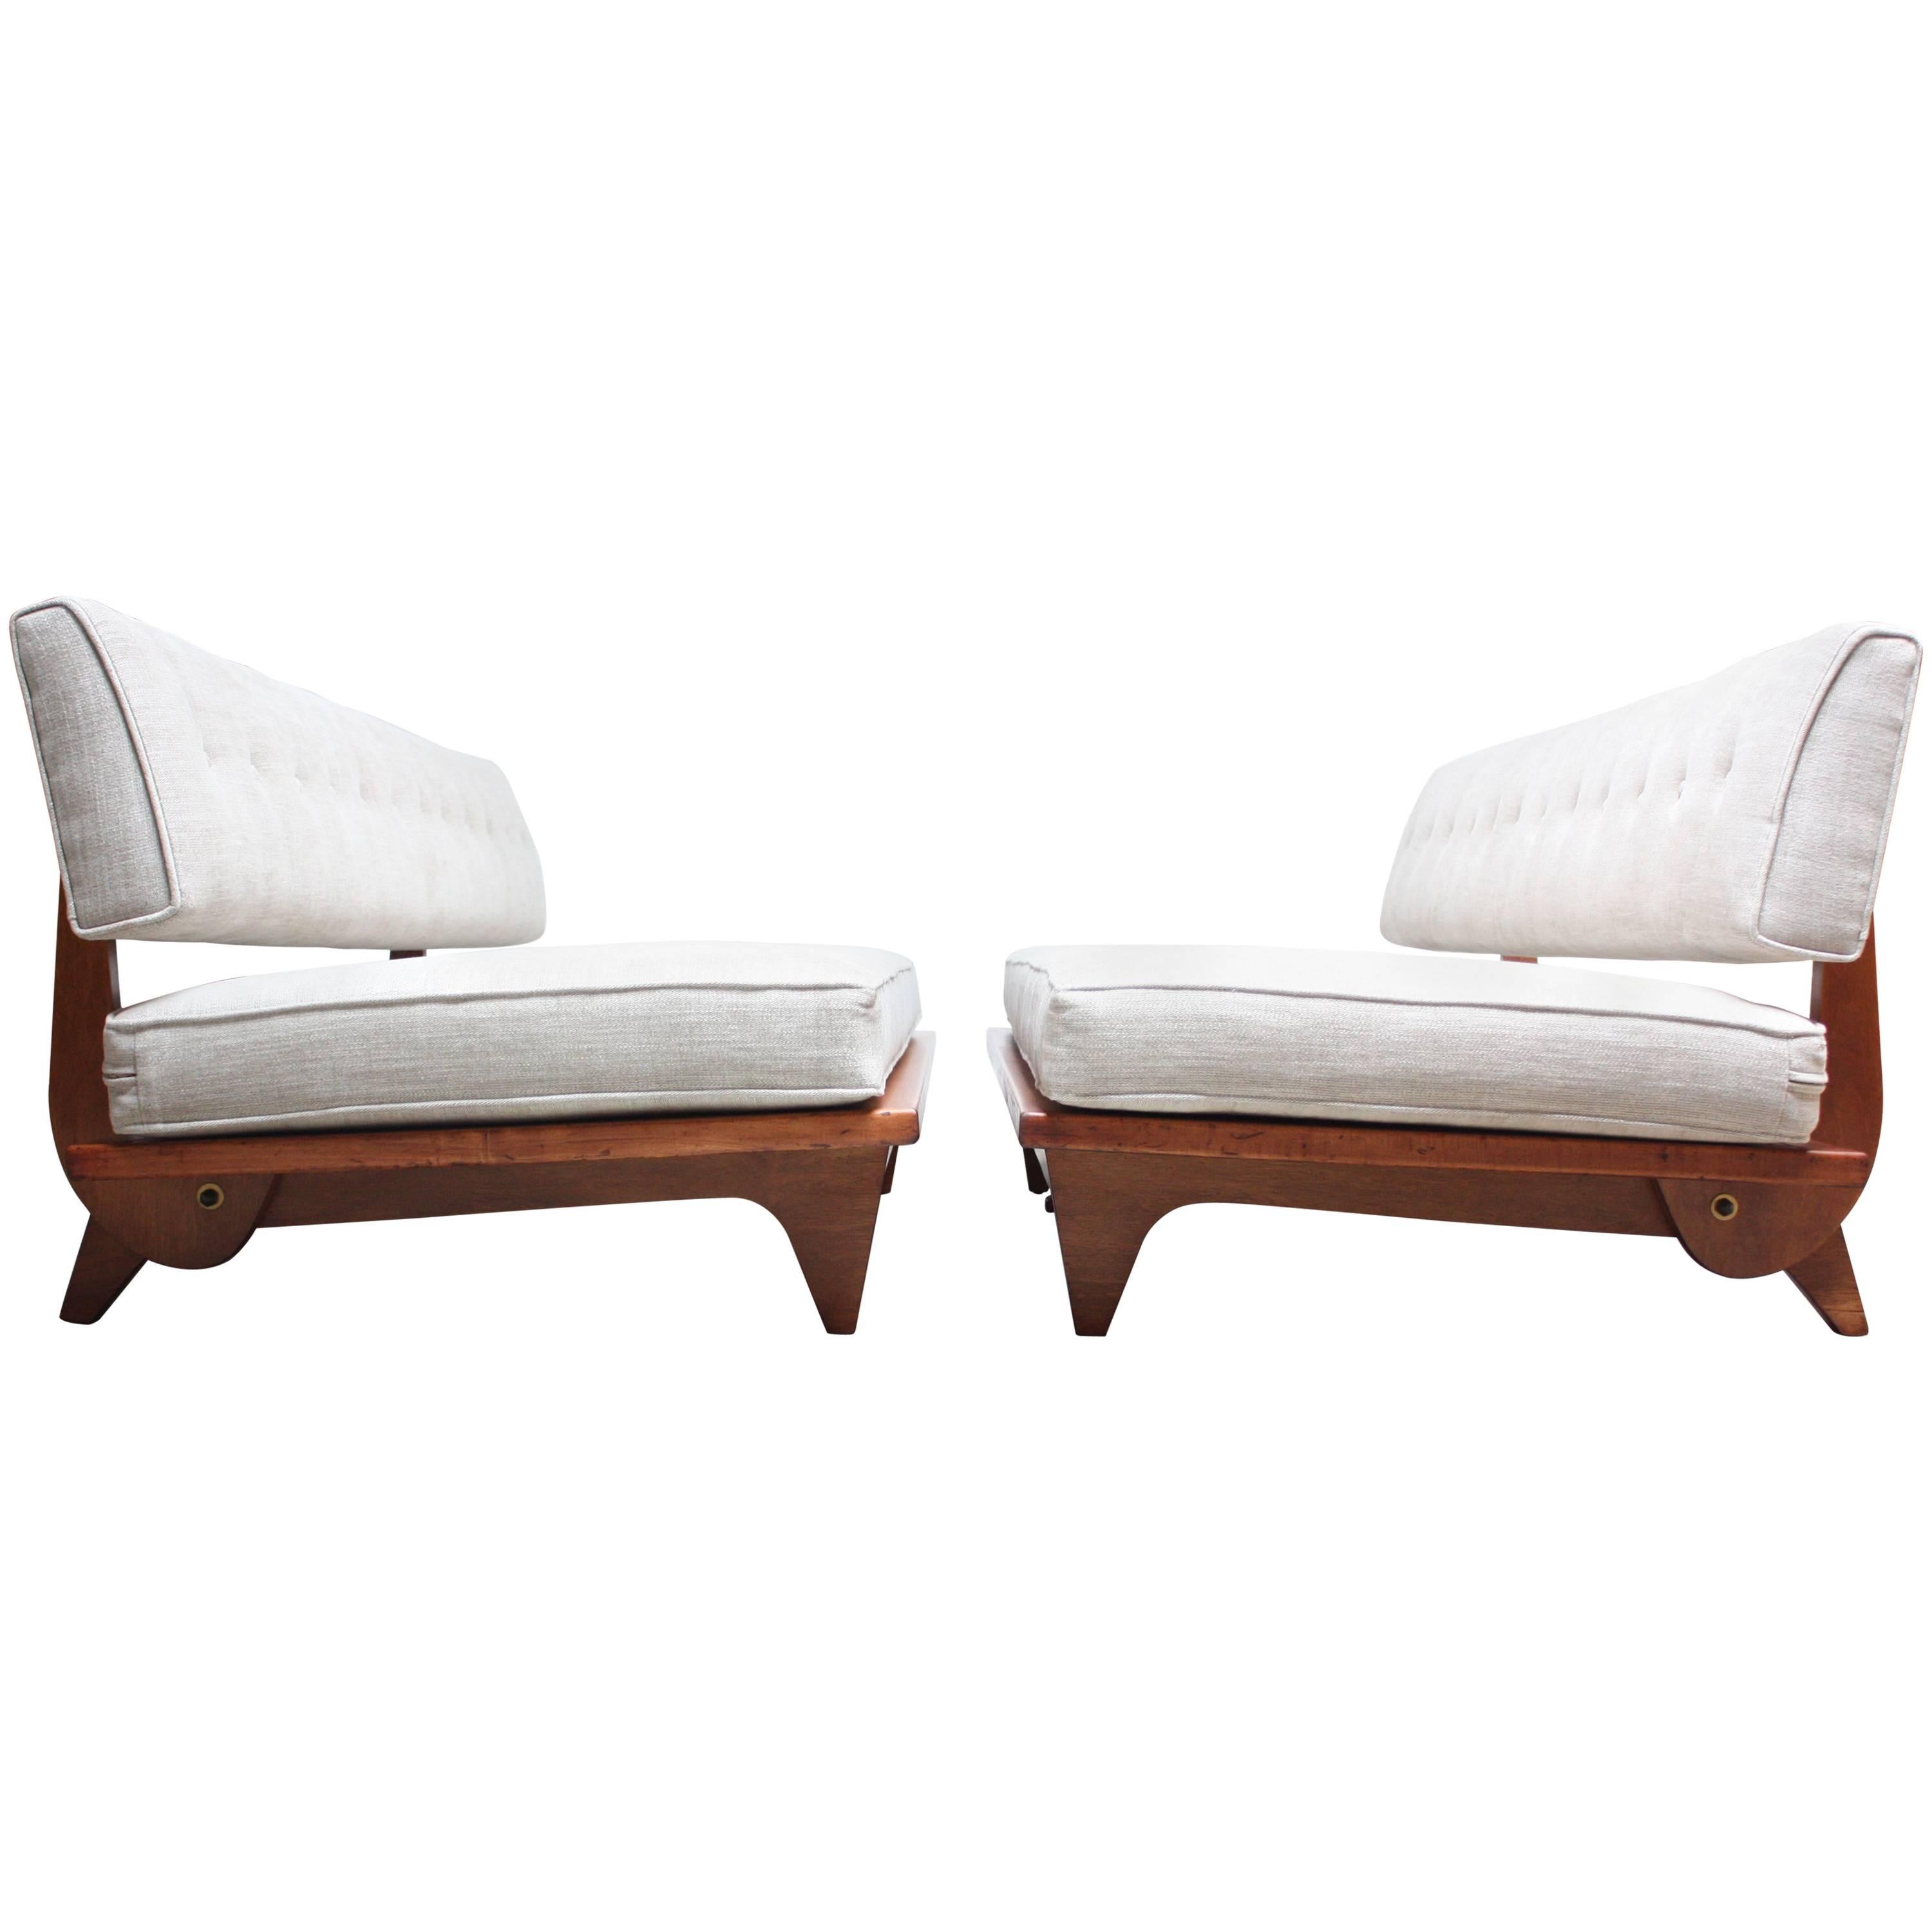 Pair of Daybed Sofas by Richard Stein for Knoll